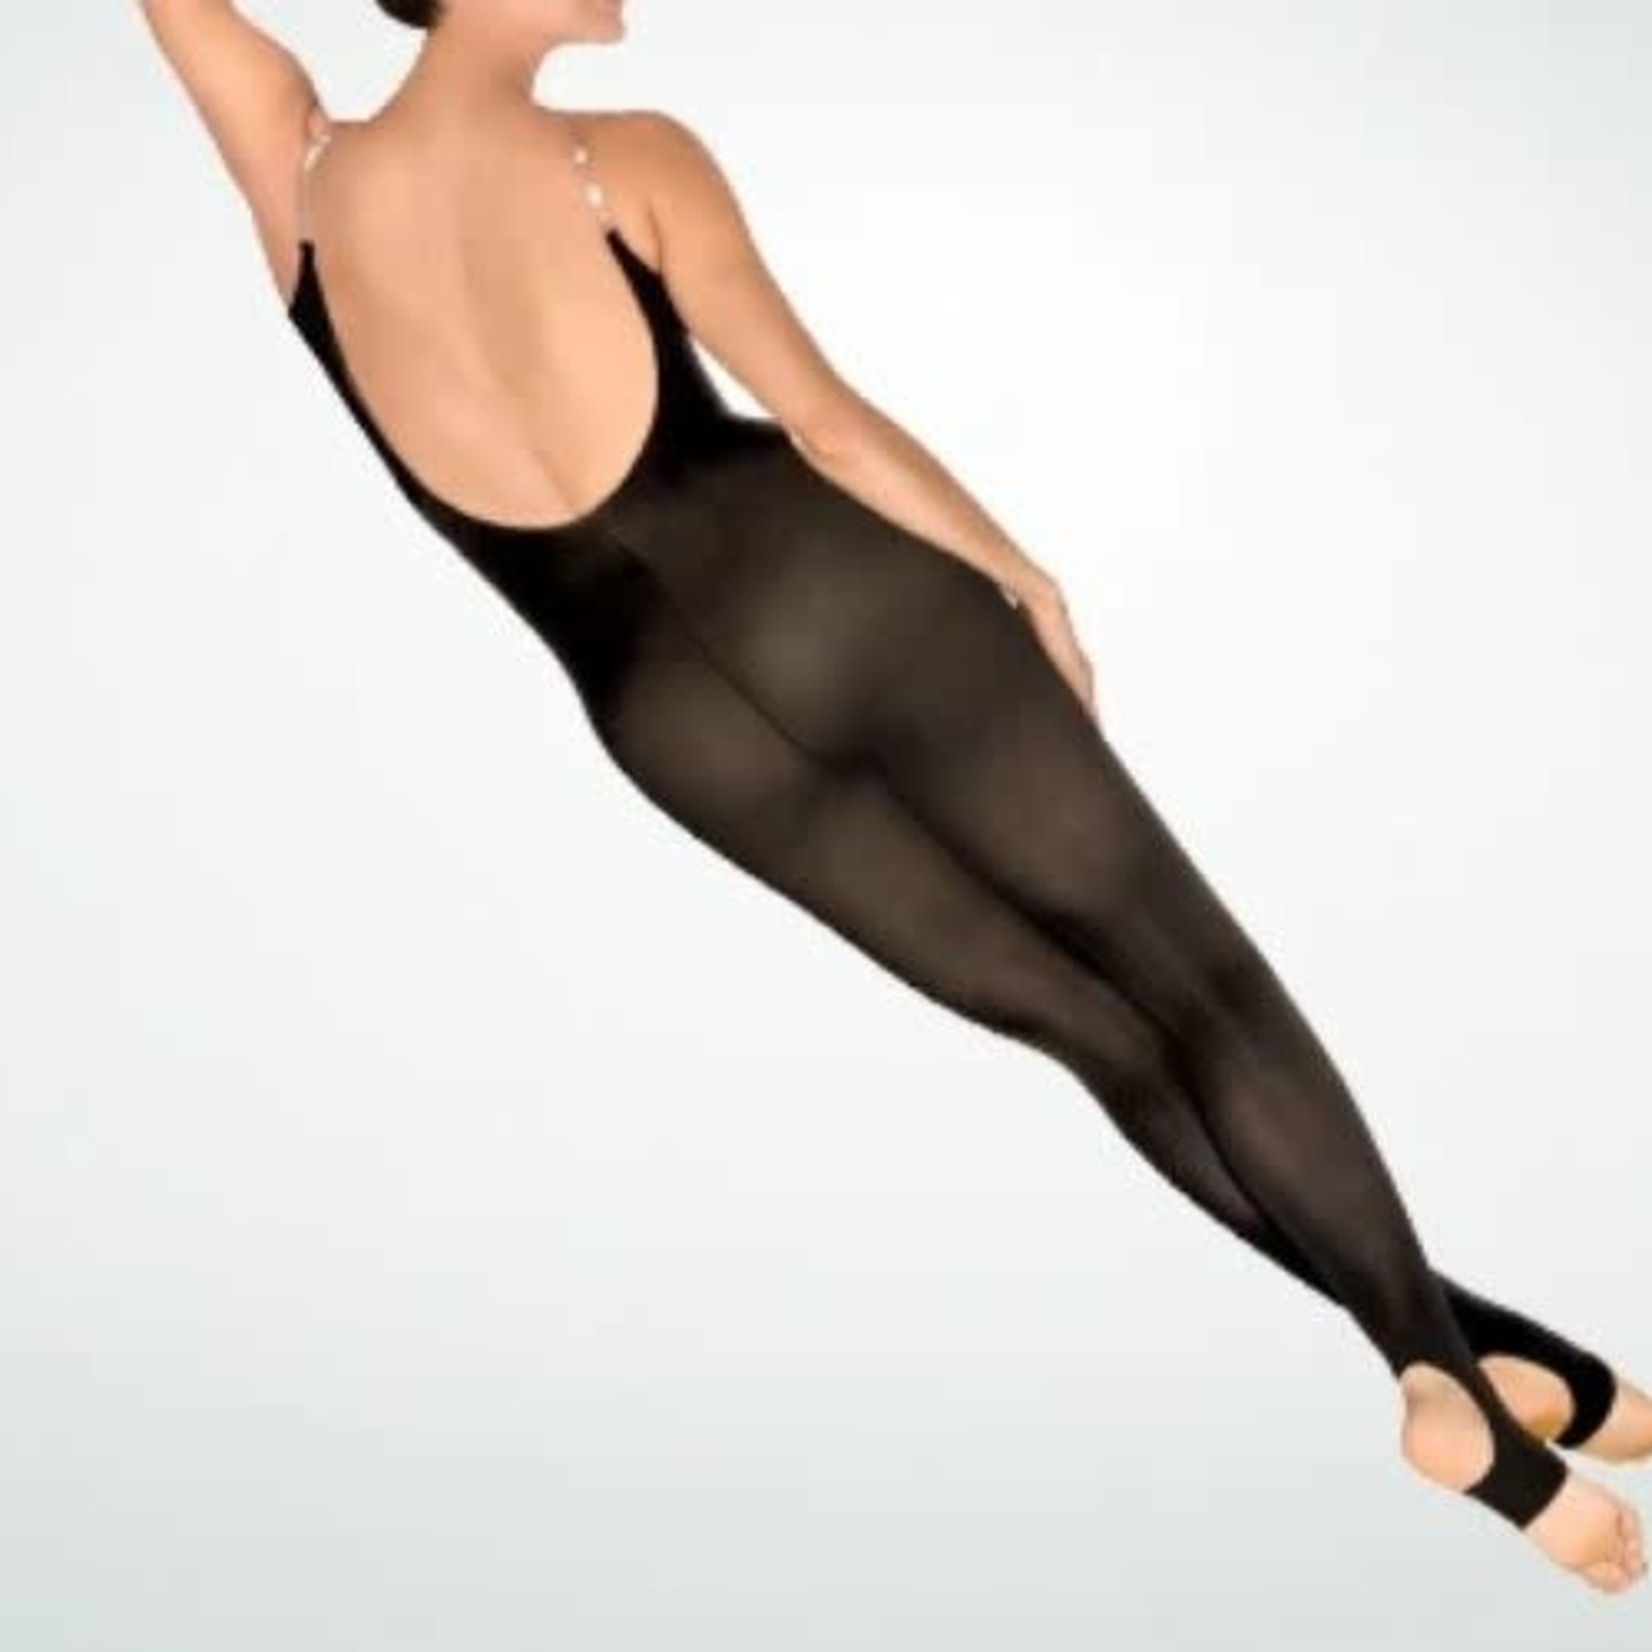 Body Wrappers Body Wrappers A93 Stirrup Full Body Tights